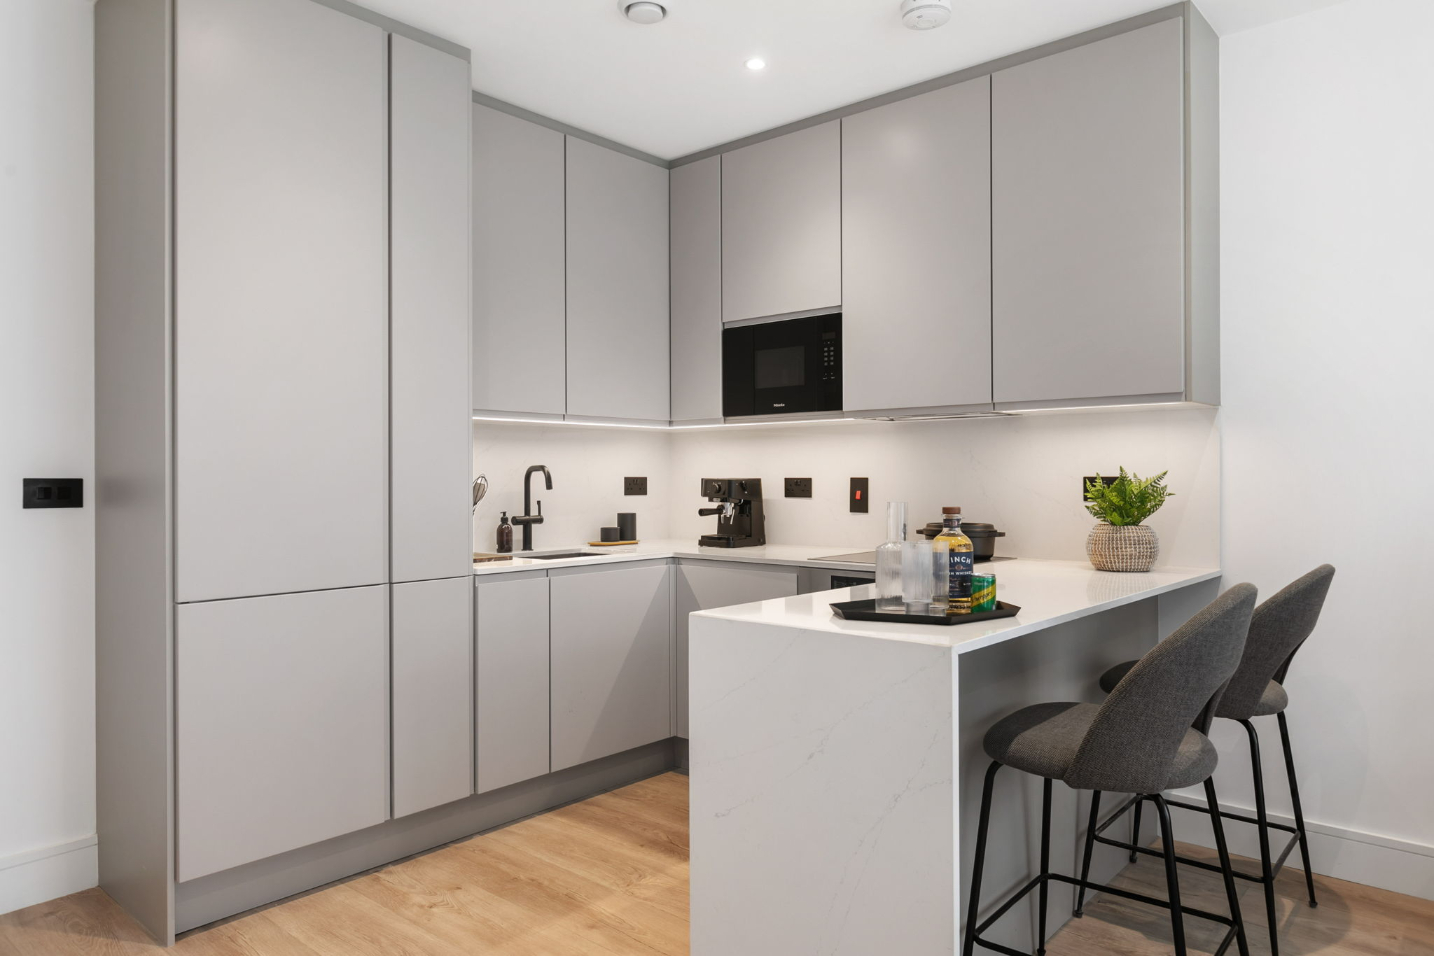 One Bedrooms @ One Lime Street, Dublin 2. | Owen Reilly